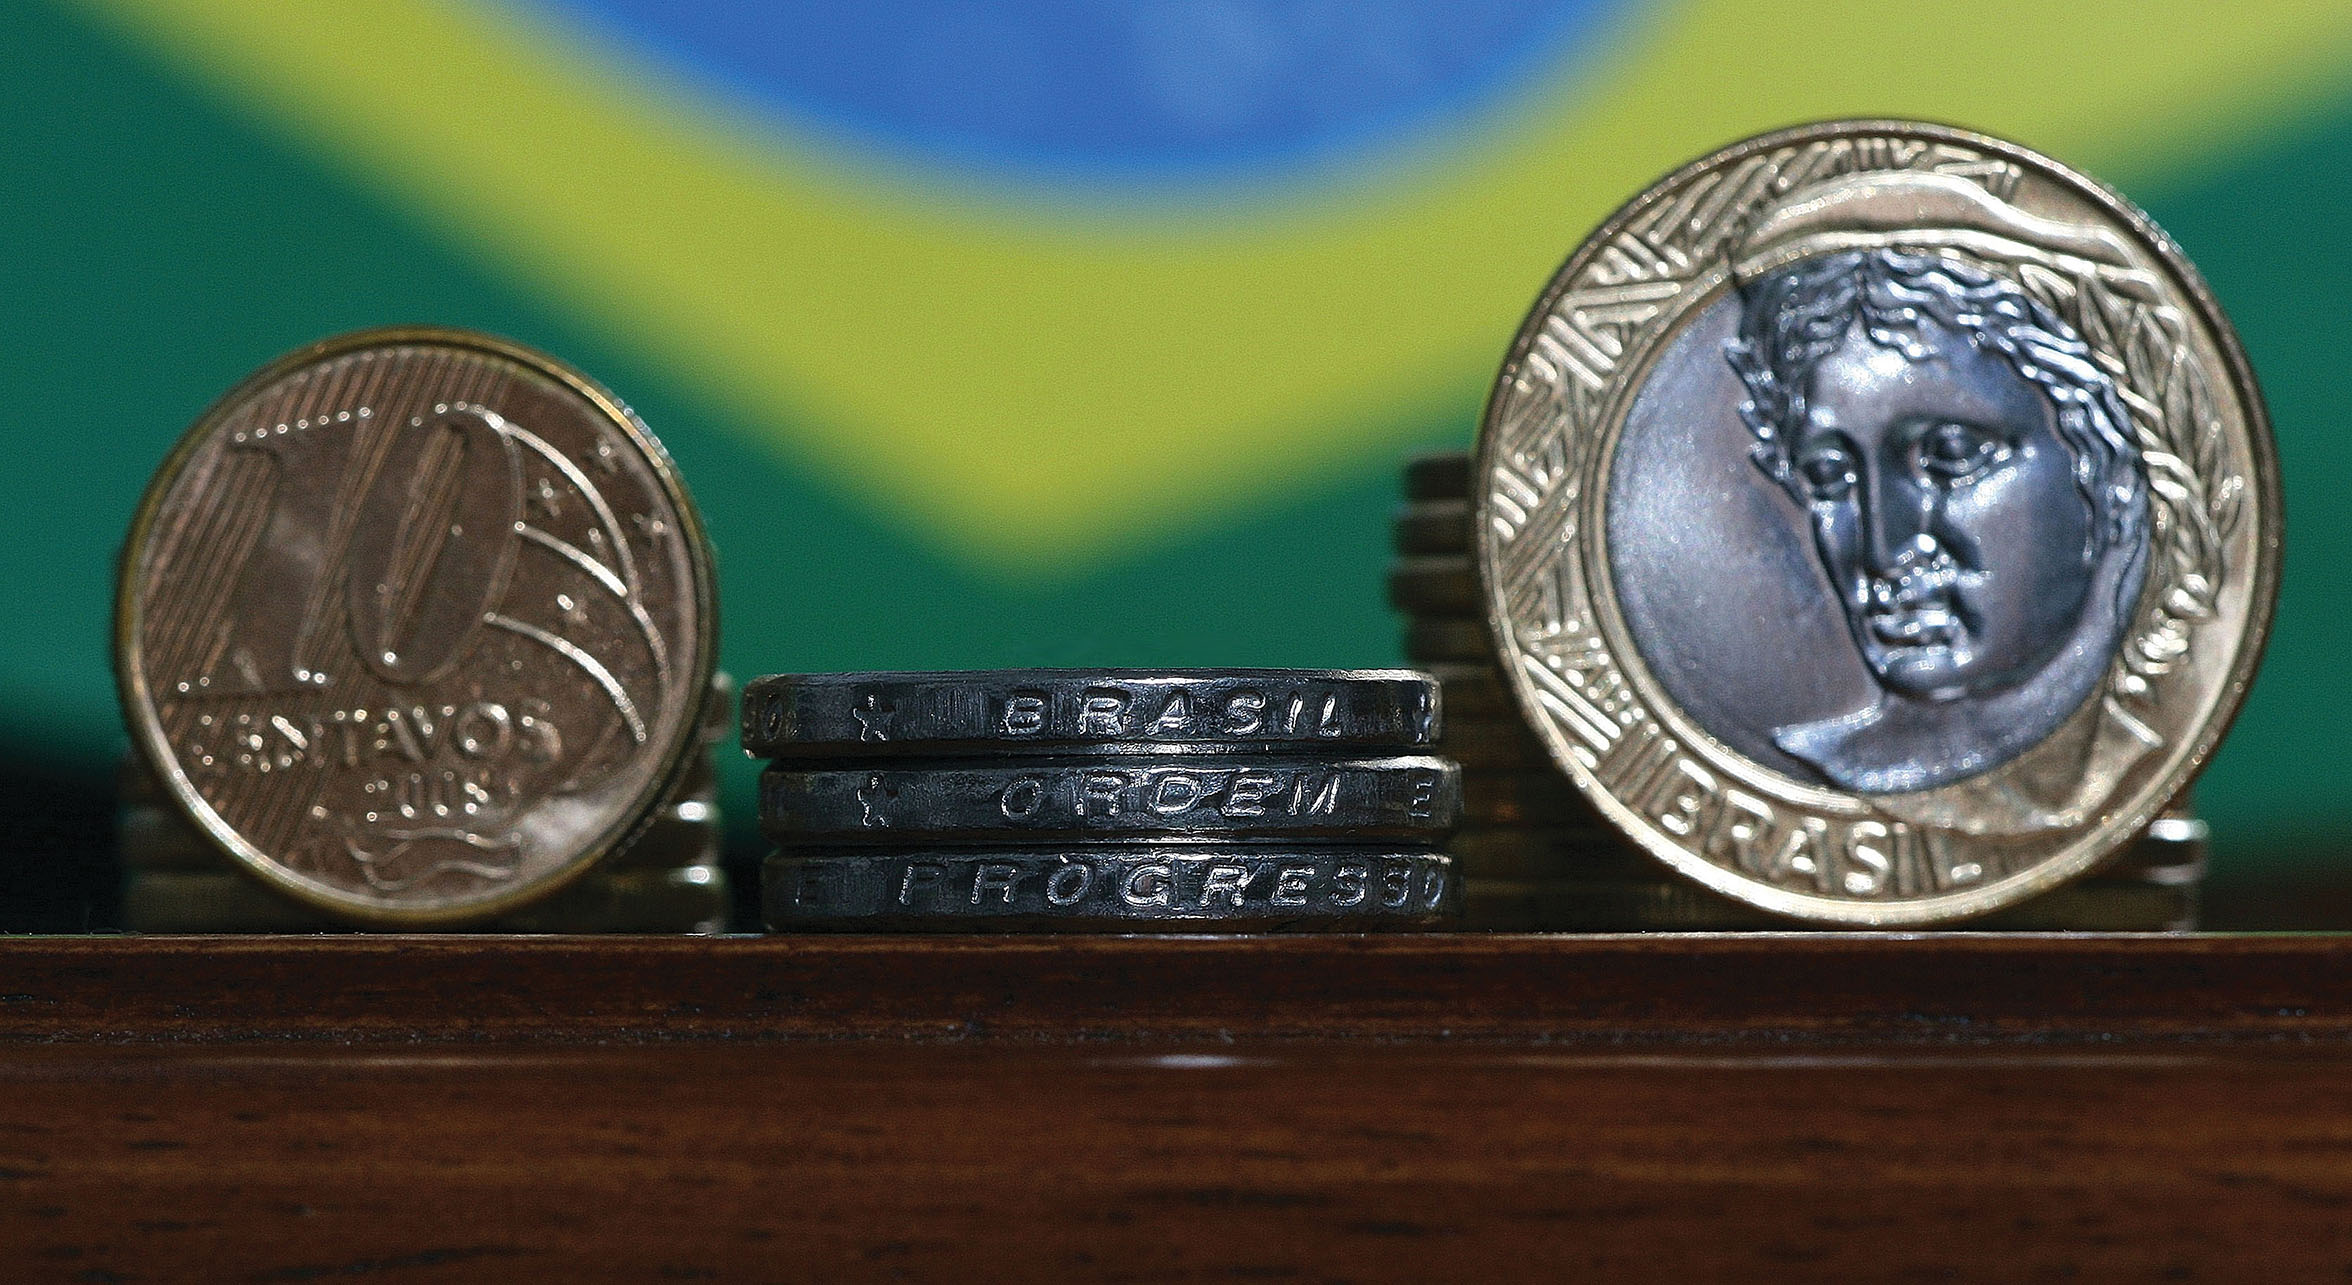 The edges of a stack of Brazilian coins spell out the national motto: Order and Progress. (Photo by Justo Ruiz.)